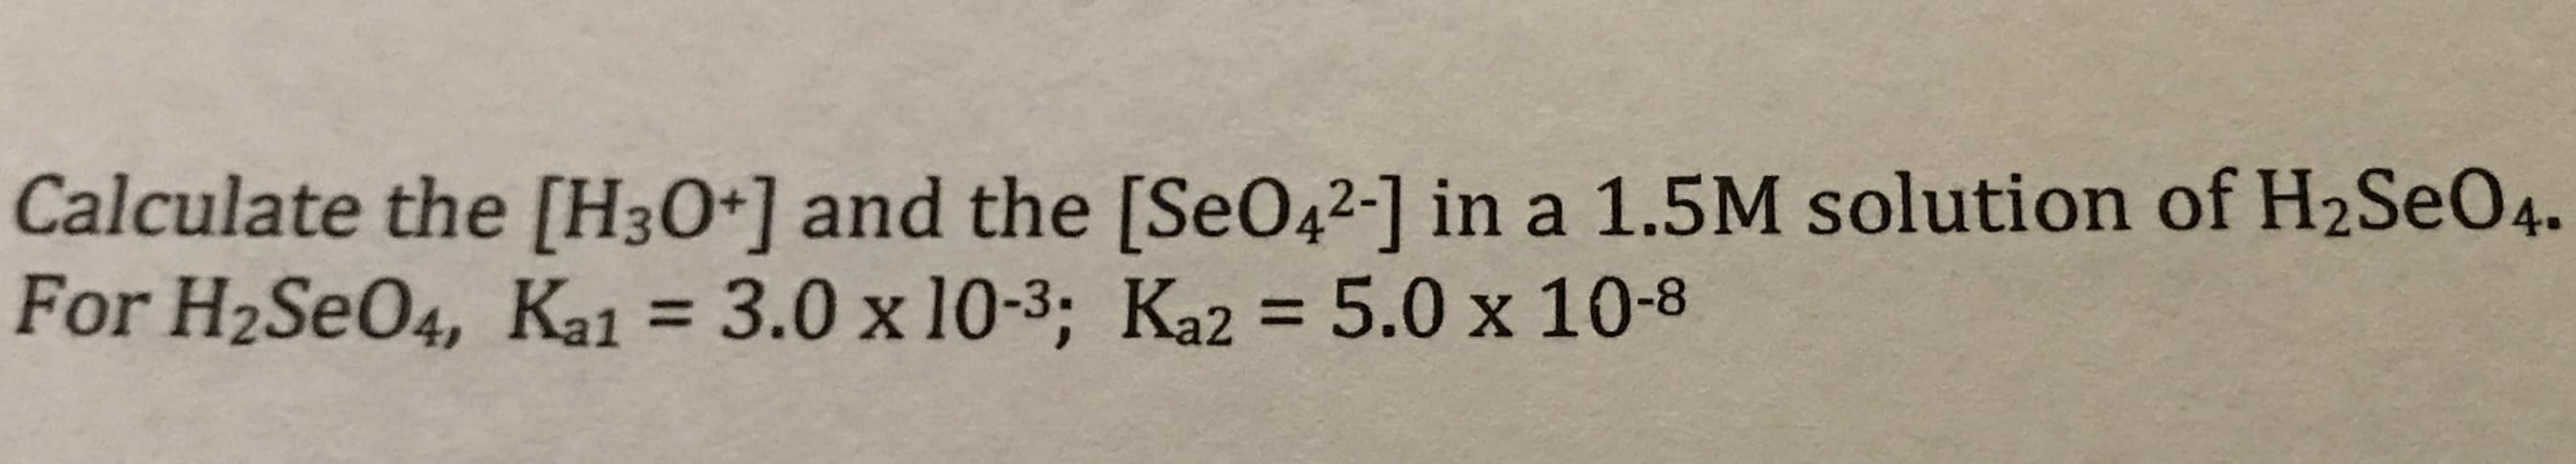 Calculate the [H30+] and the [SeO42-] in a 1.5M solution of H2SEO4.
For H2SeO4, Ka1 = 3.0 x 10-3: Ka2 = 5.0 x 10-8
%3D
%3D
